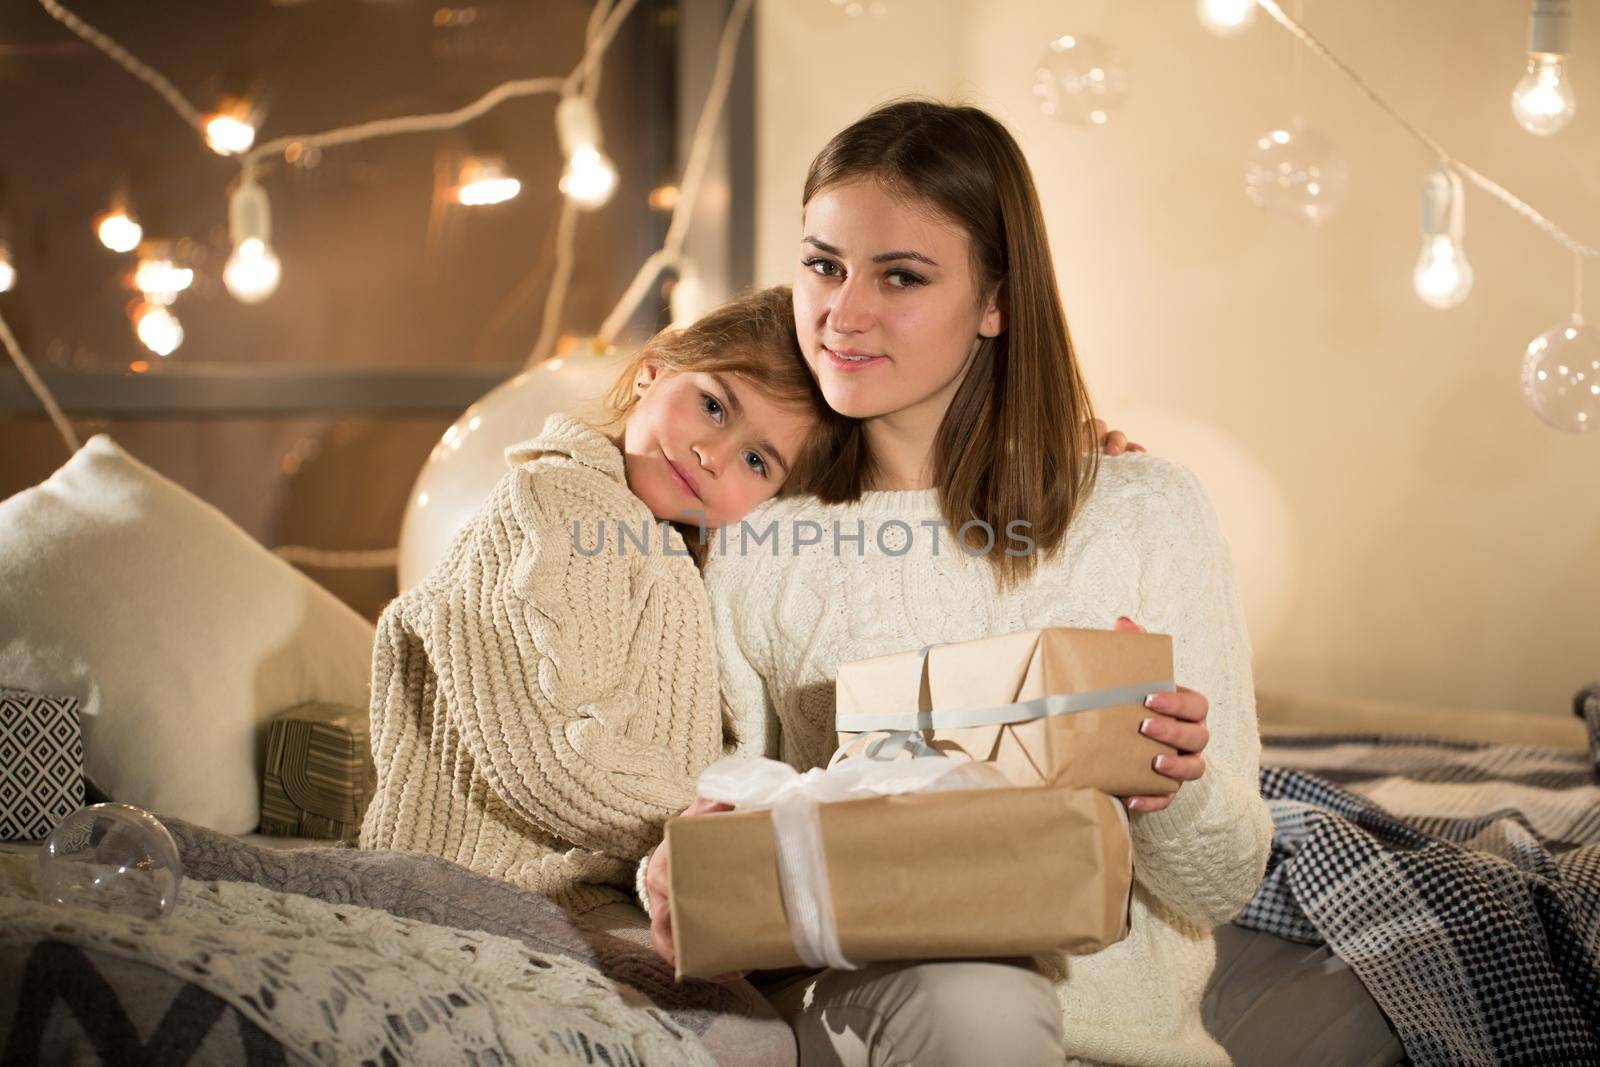 Beautiful mother and daughter opening a magical Christmas gift in the cozy interior of the house. New year. by StudioPeace